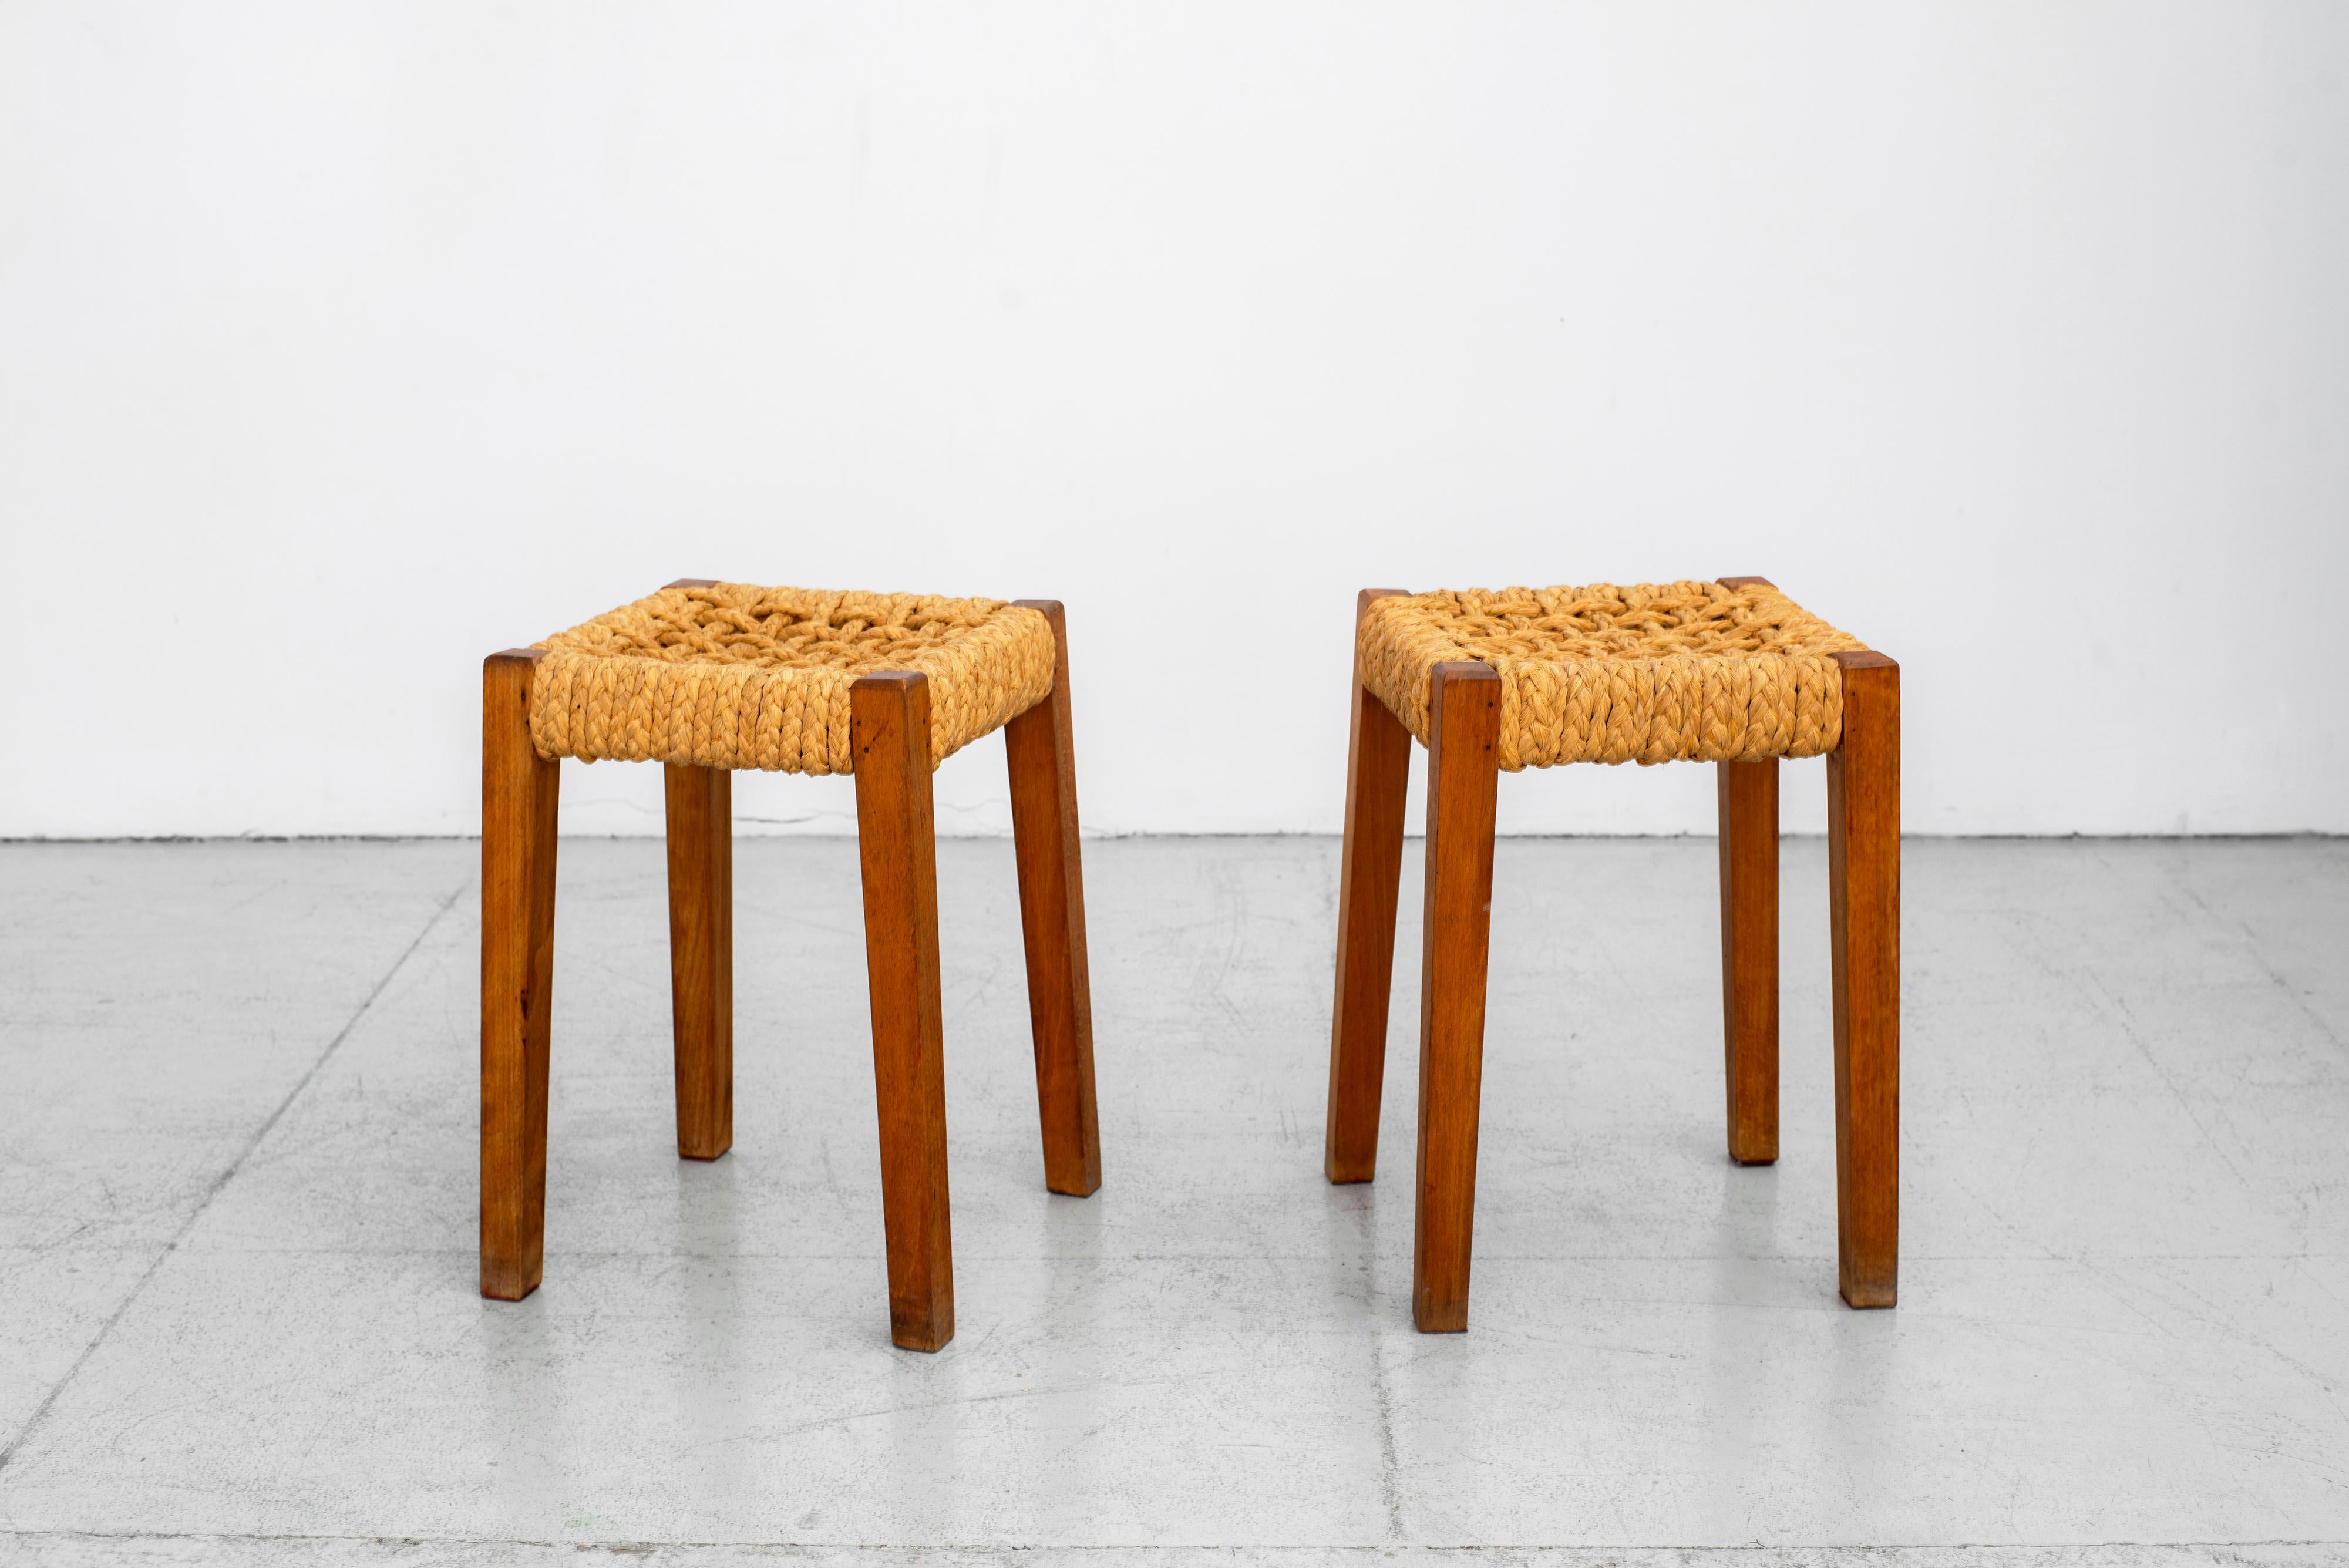 Wonderful pair of stools by Audoux Minet
rope seat with oakwood legs,
France, circa 1940s.
     